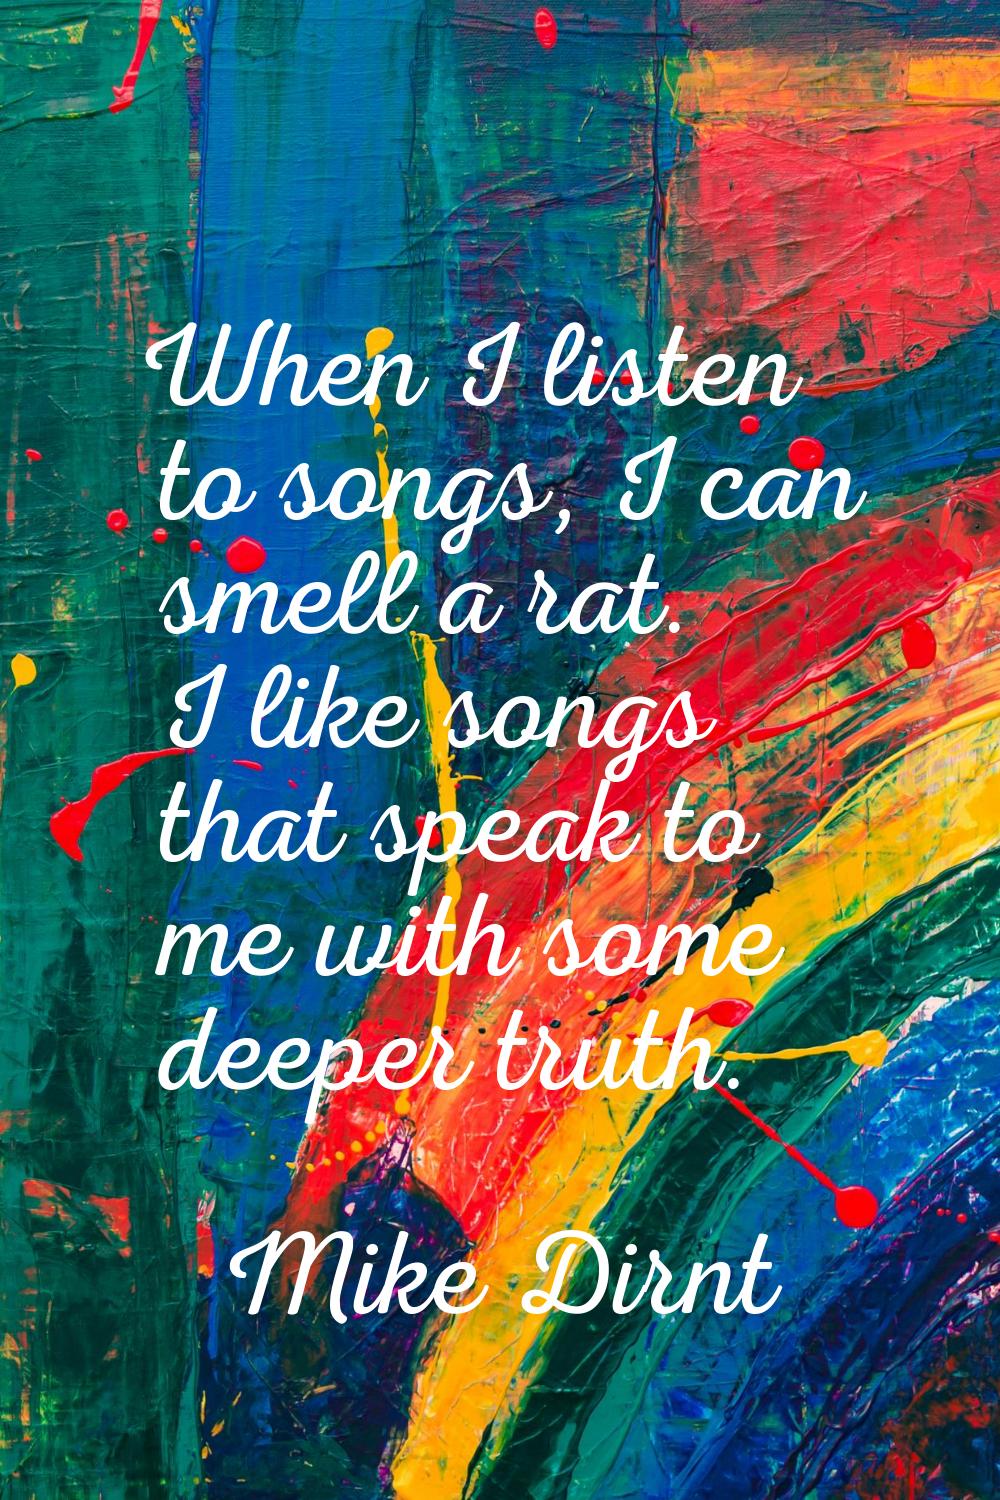 When I listen to songs, I can smell a rat. I like songs that speak to me with some deeper truth.